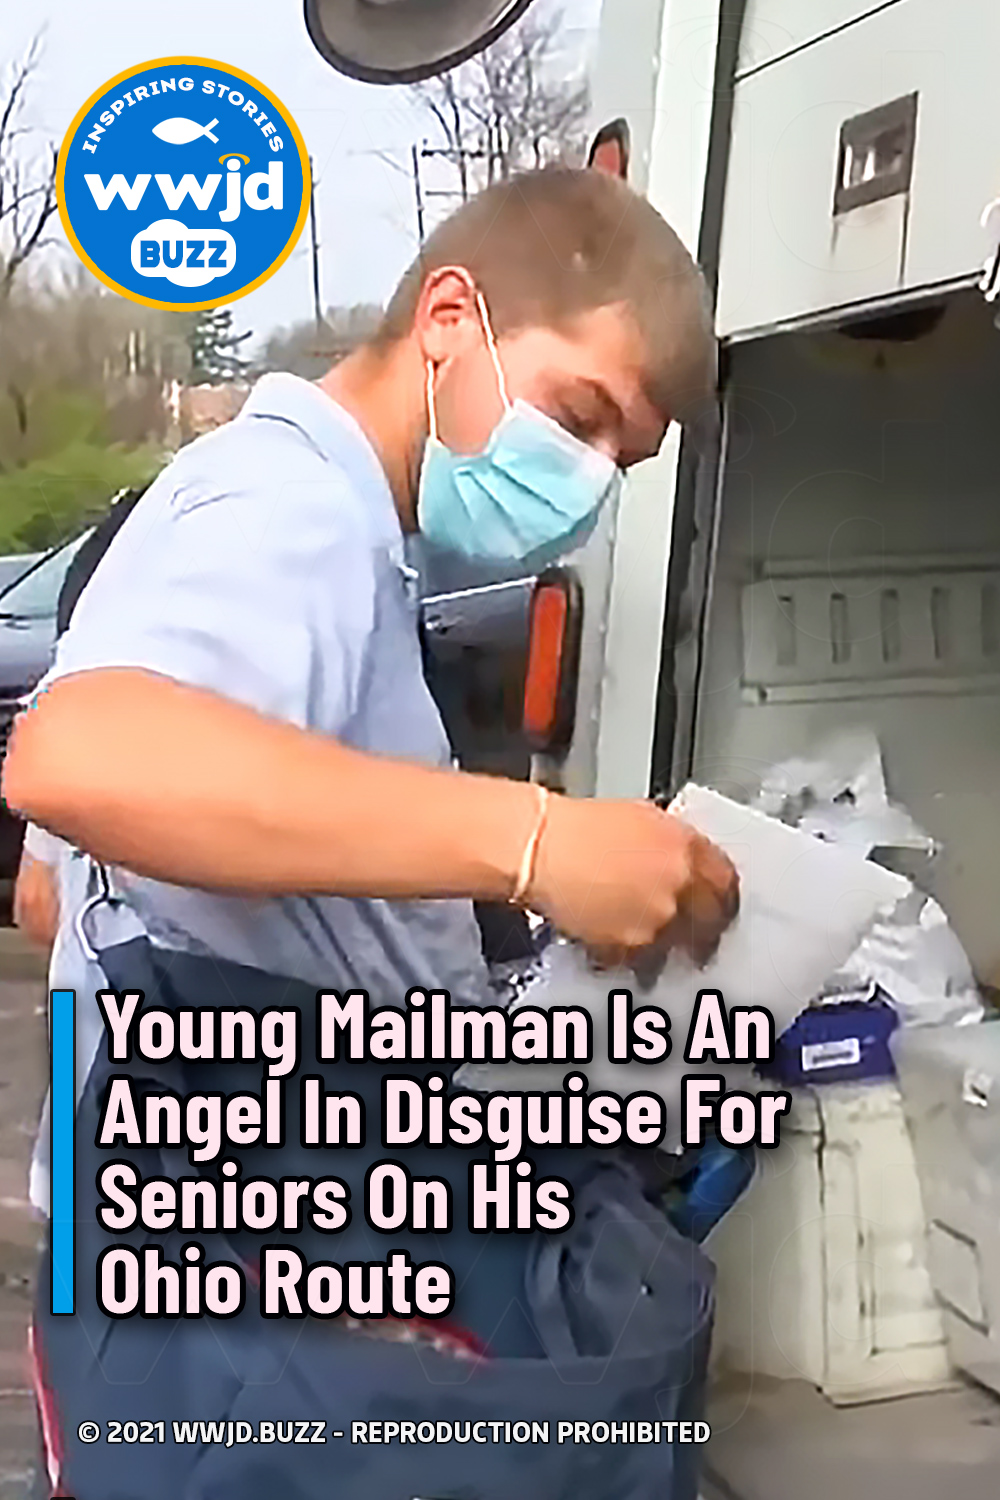 Young Mailman Is An Angel In Disguise For Seniors On His Ohio Route